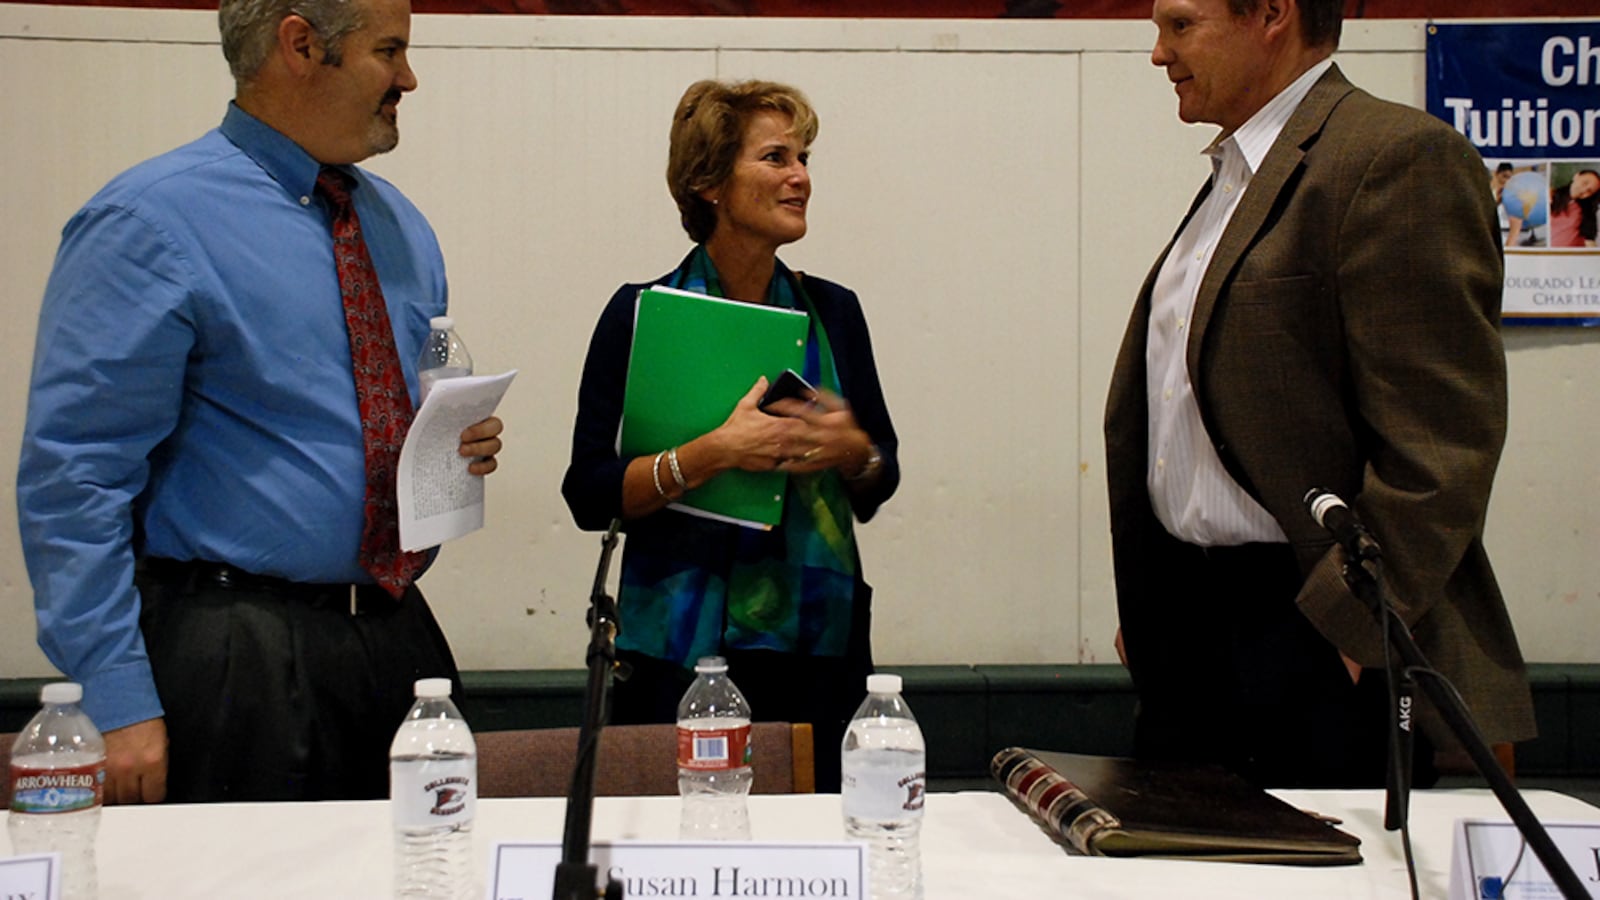 School board recall candidates Matthew Dhieux and Susan Harmon chat with incumbent John Newkirk after a candidate forum.